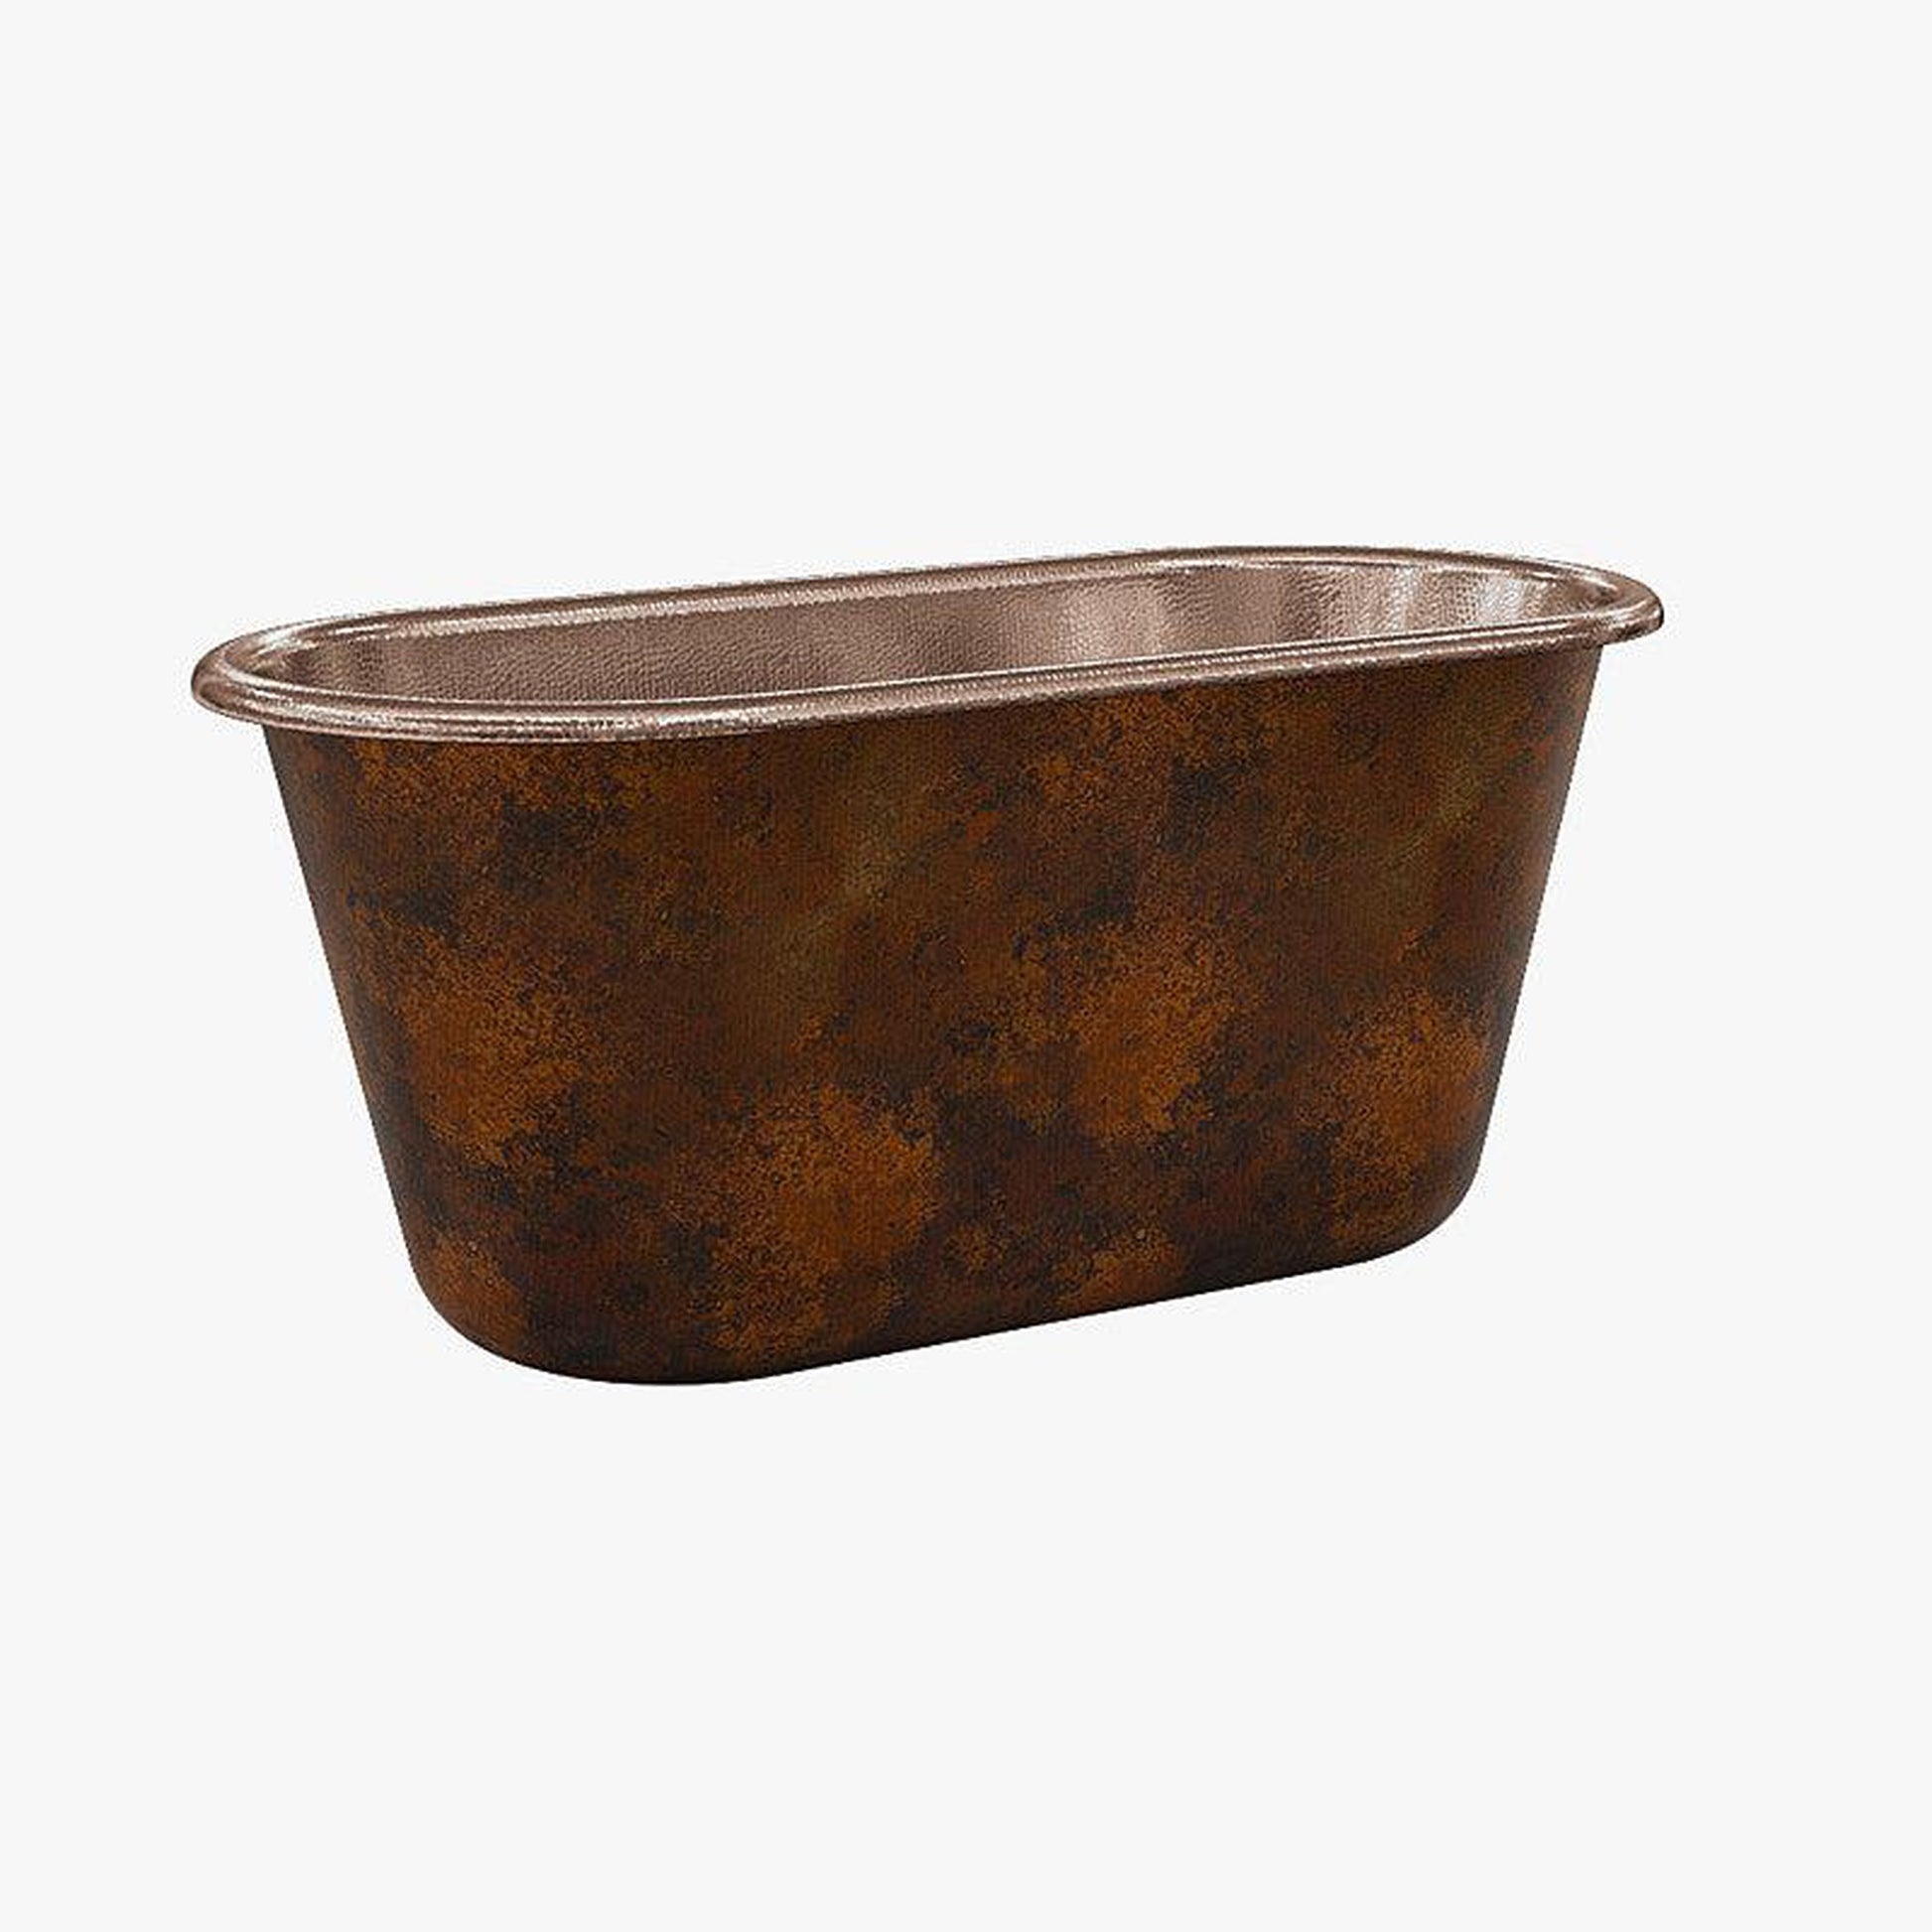 CopperSmith Heritage HX1 60" x 31" x 31" 14-Gauge Fire Copper Freestanding Bathtub With Polished Copper Interior and Oil Rubbed Bronze Lift & Turn Tub Drain and Polished Brass Tub Filler